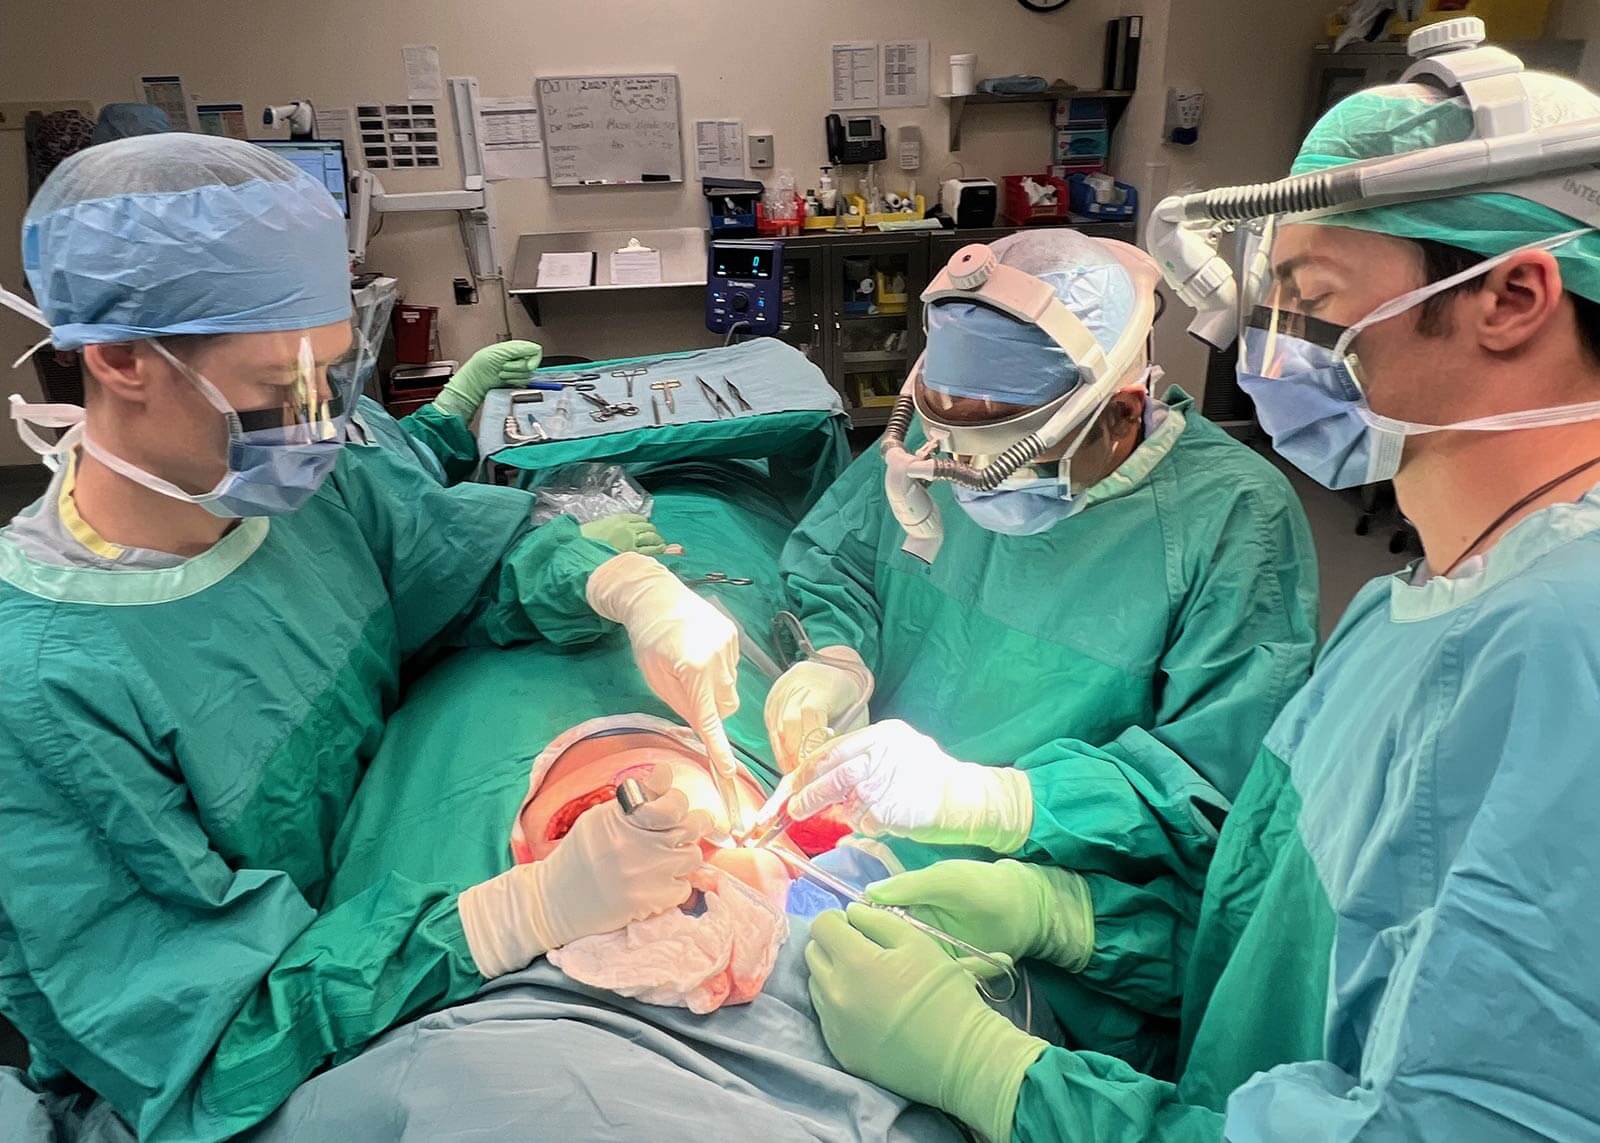 Three surgeons operate on a breast cancer patient